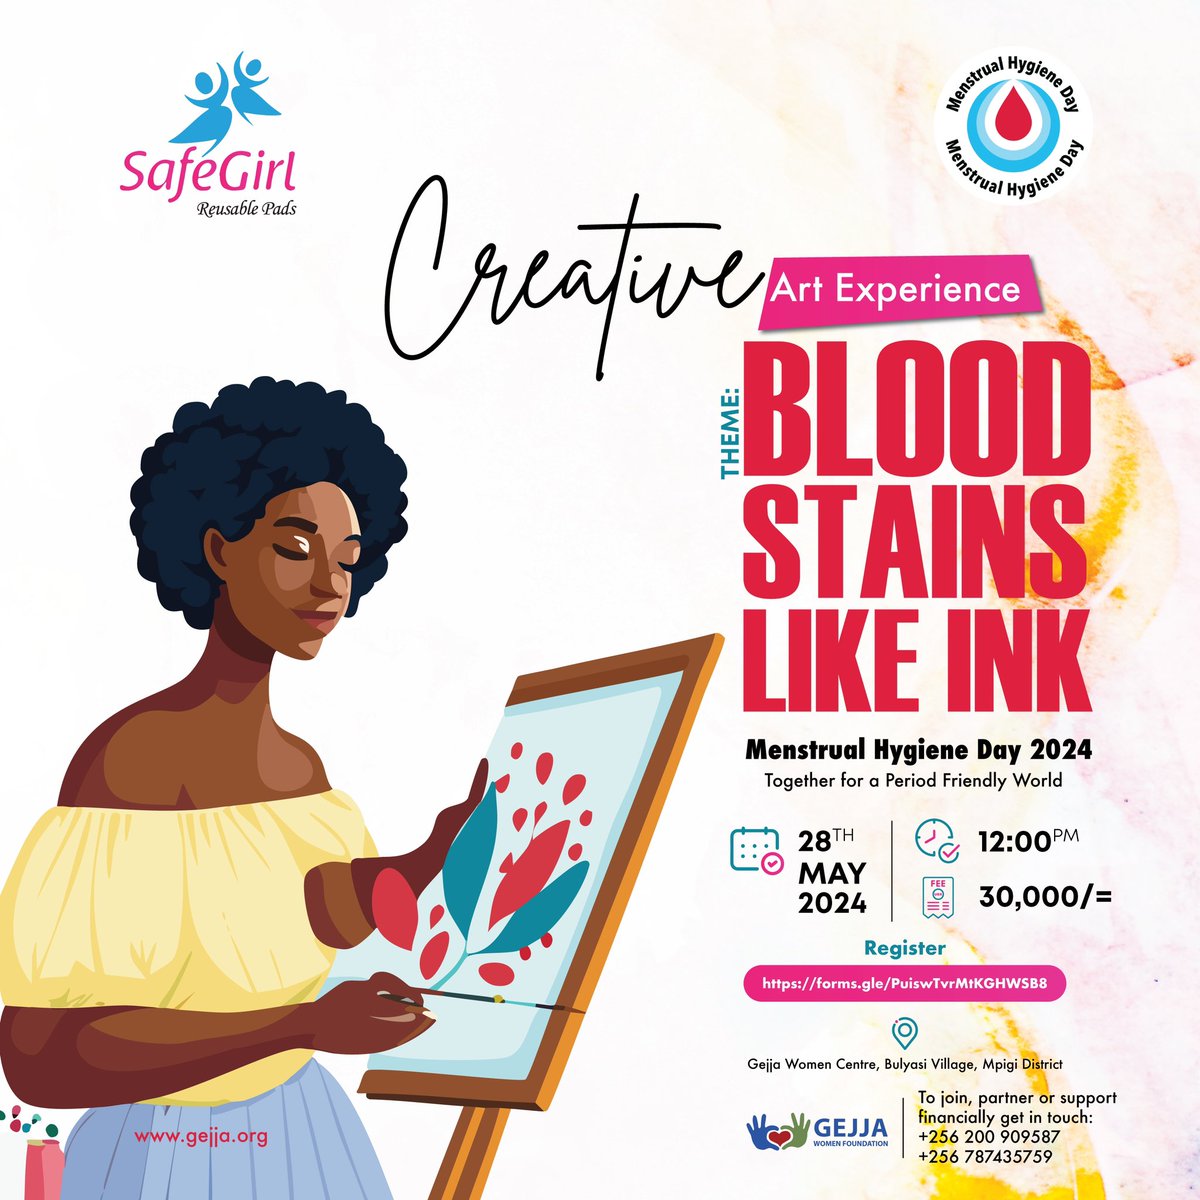 Join us for a fun filled day as we celebrate the Menstrual Hygiene Day on the 28th of this very month. A ticket goes for only UGX 30,000. Register here: forms.gle/PuiswTvrMtKGHW…